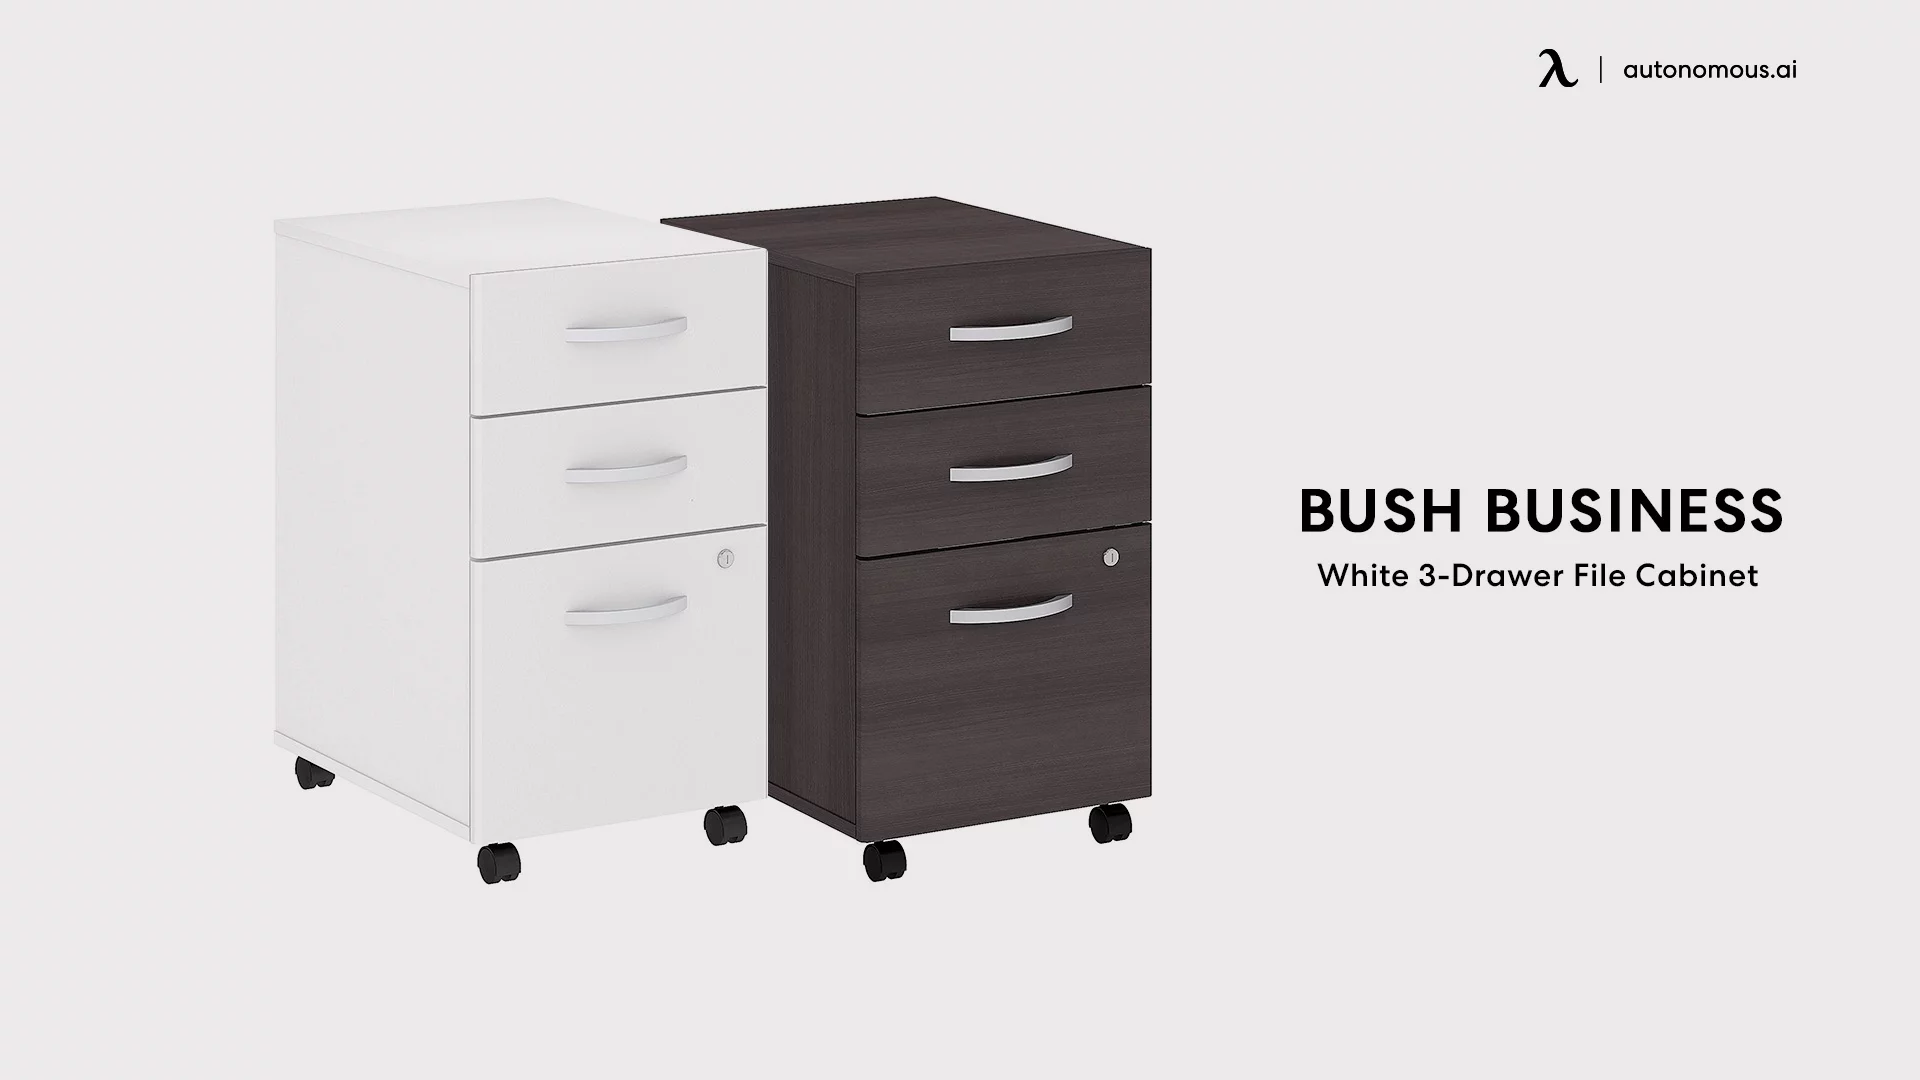 White 3-Drawer File Cabinet From Bush Business